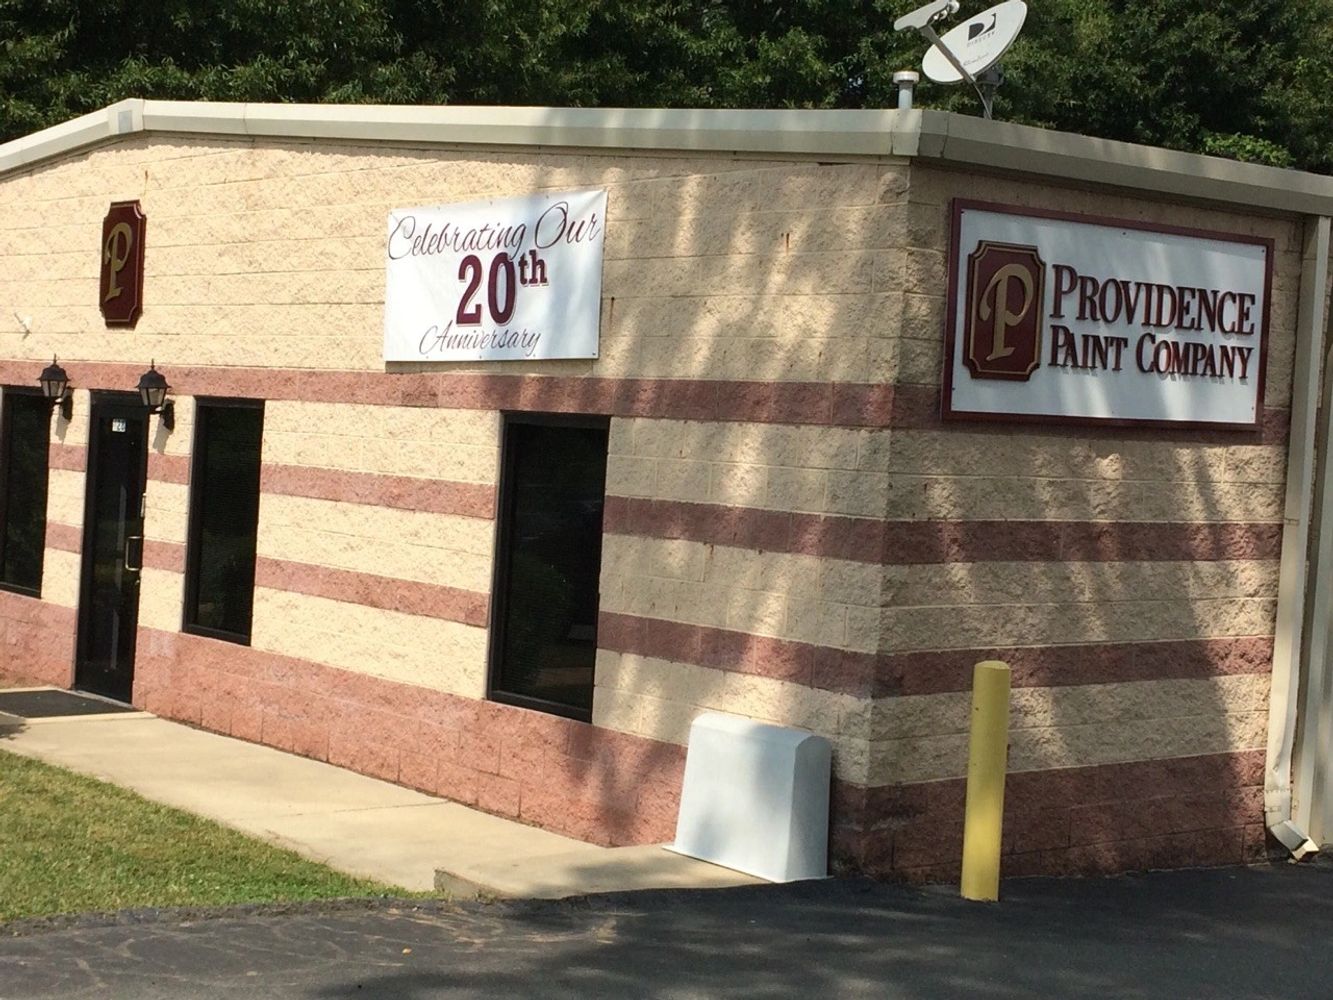 Providence Paint Company - Celebrating Our 20th Anniversary!